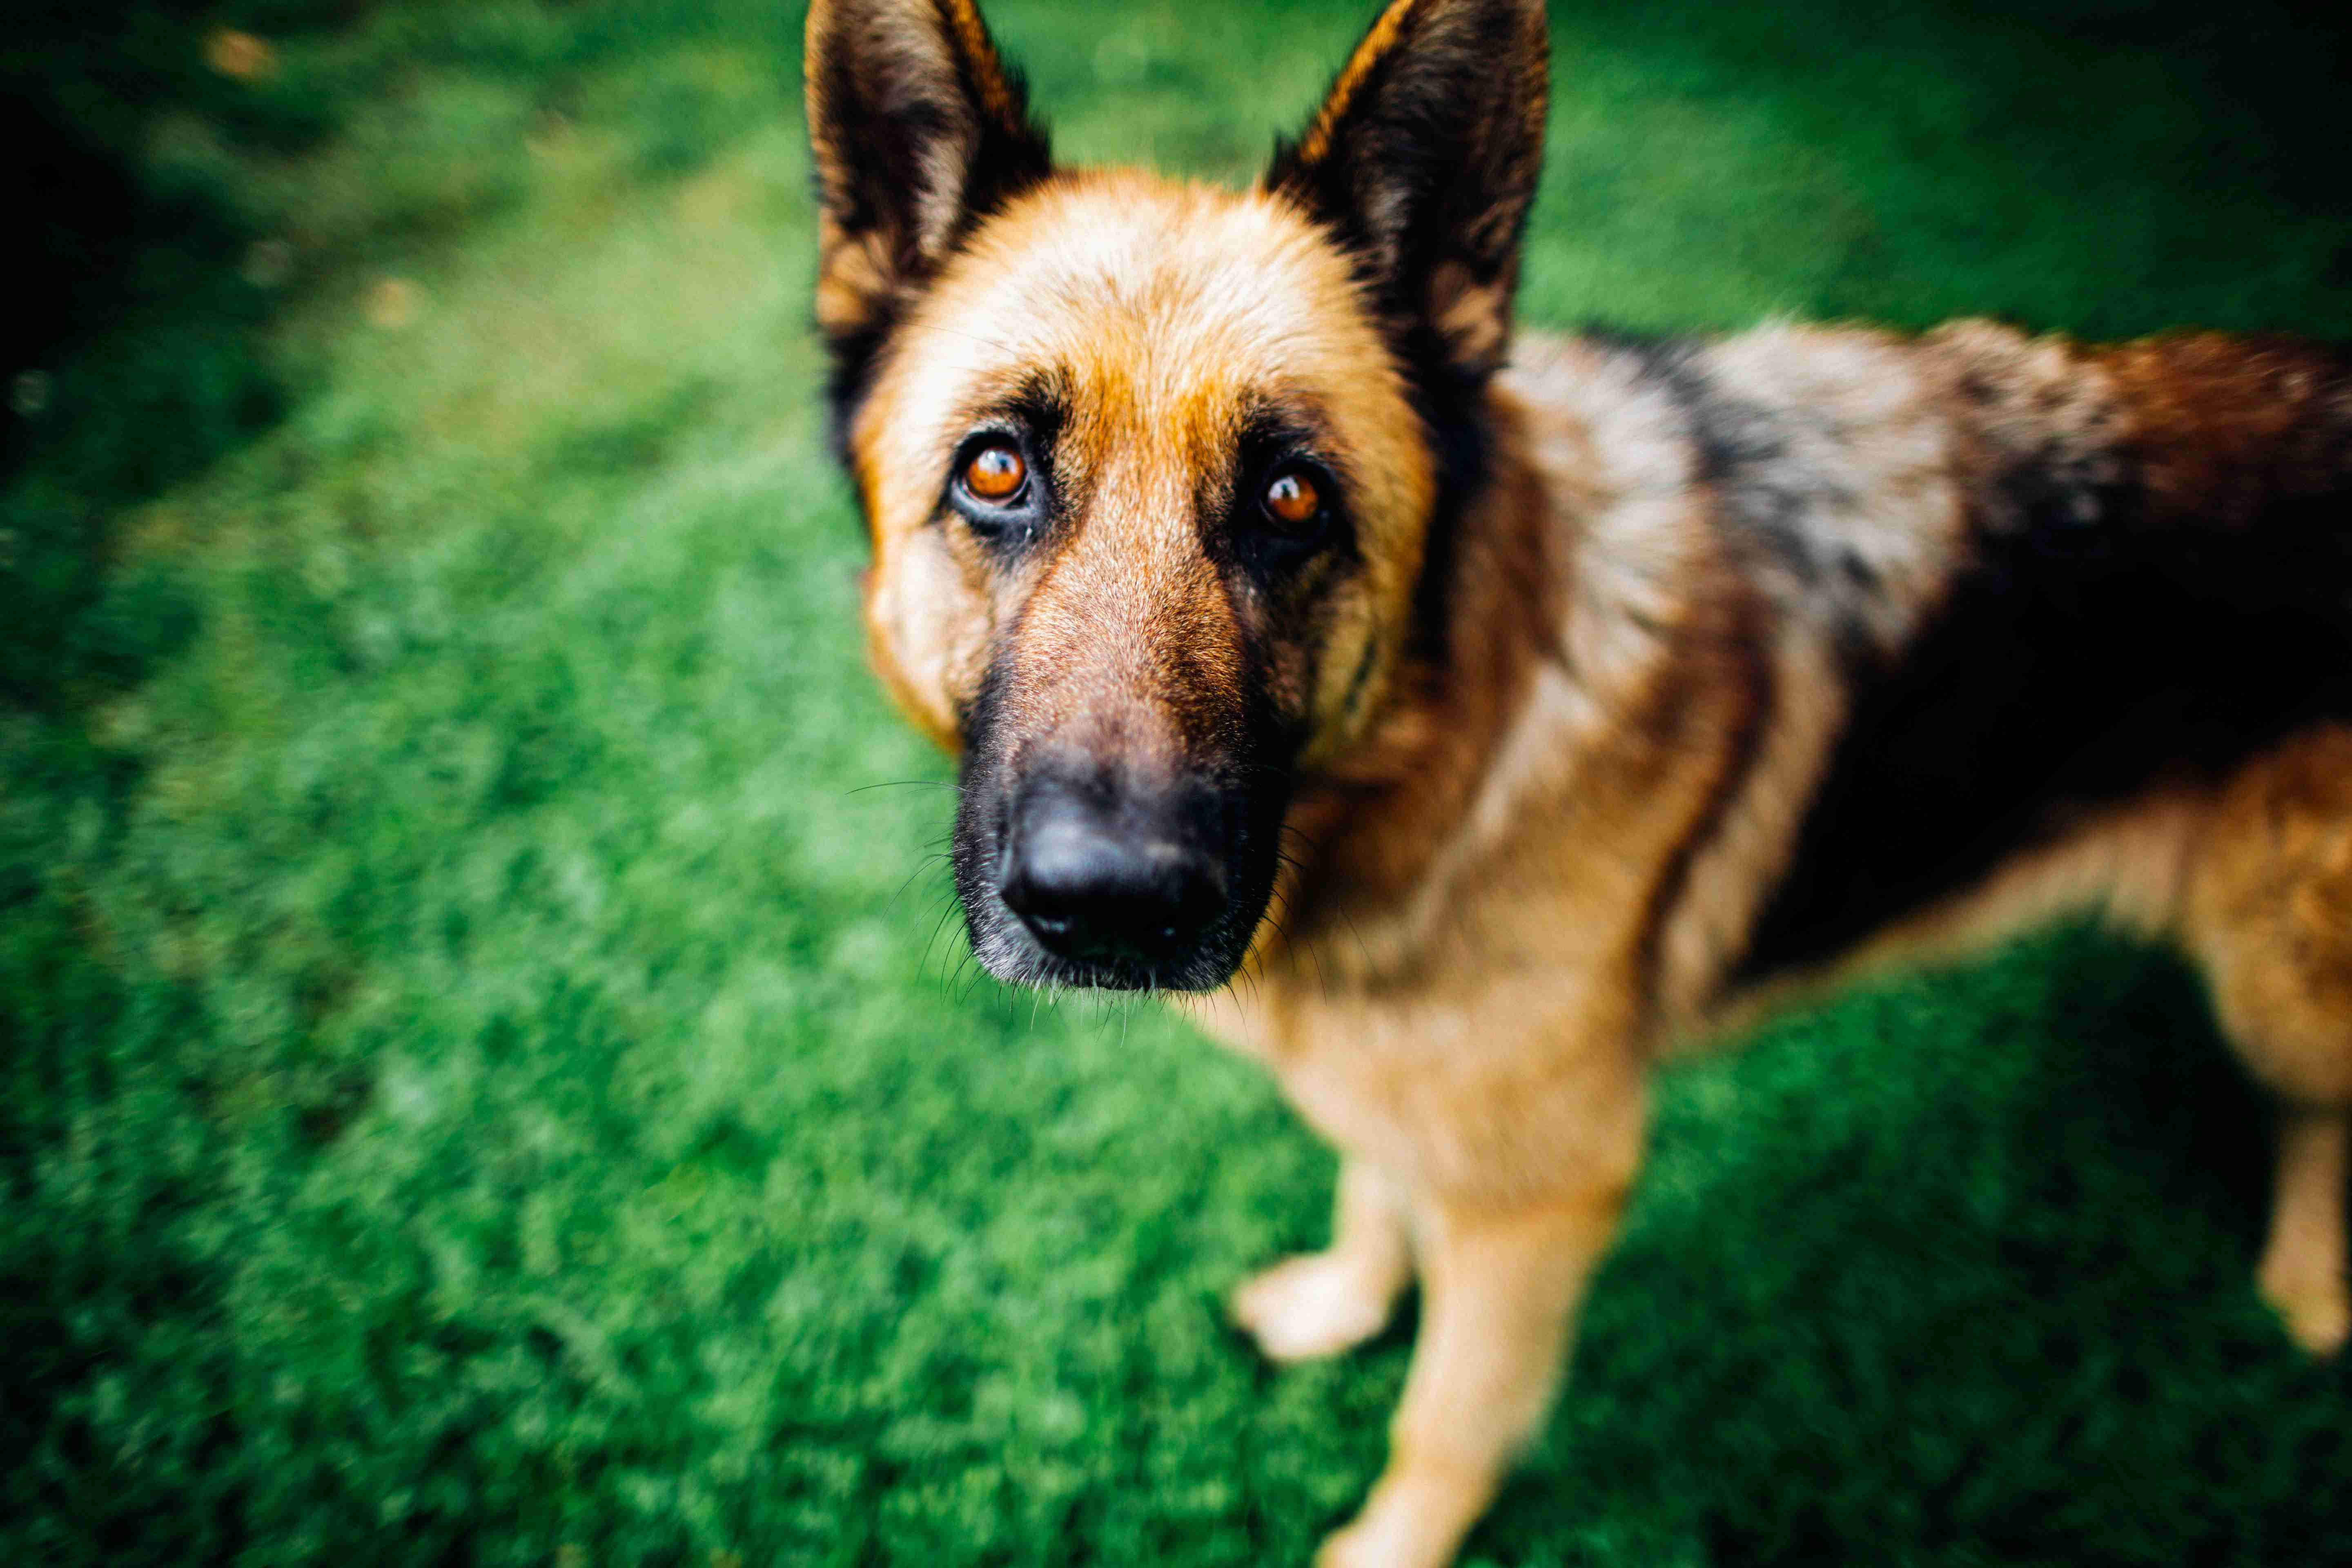 Can German shepherds be trained to detect seizures or other medical issues?